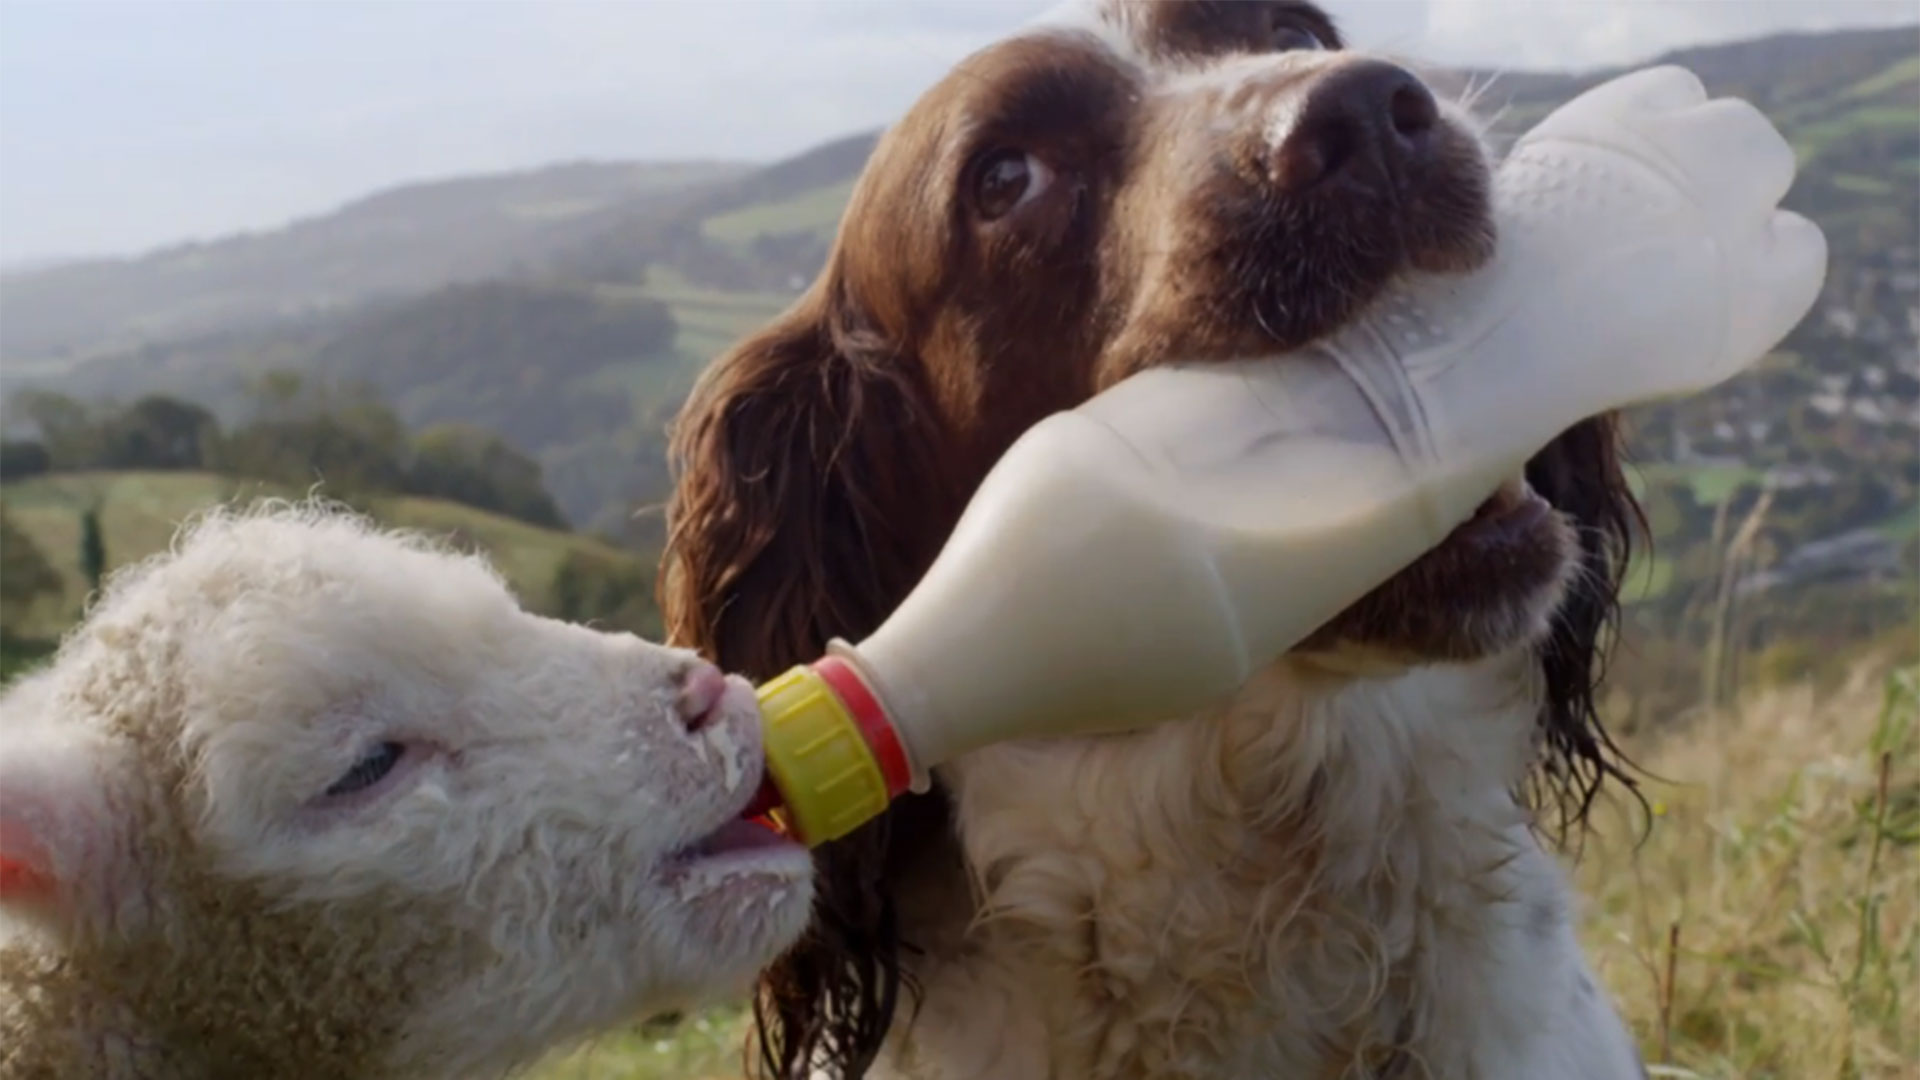 A dog feeding a lamb from a bottle.